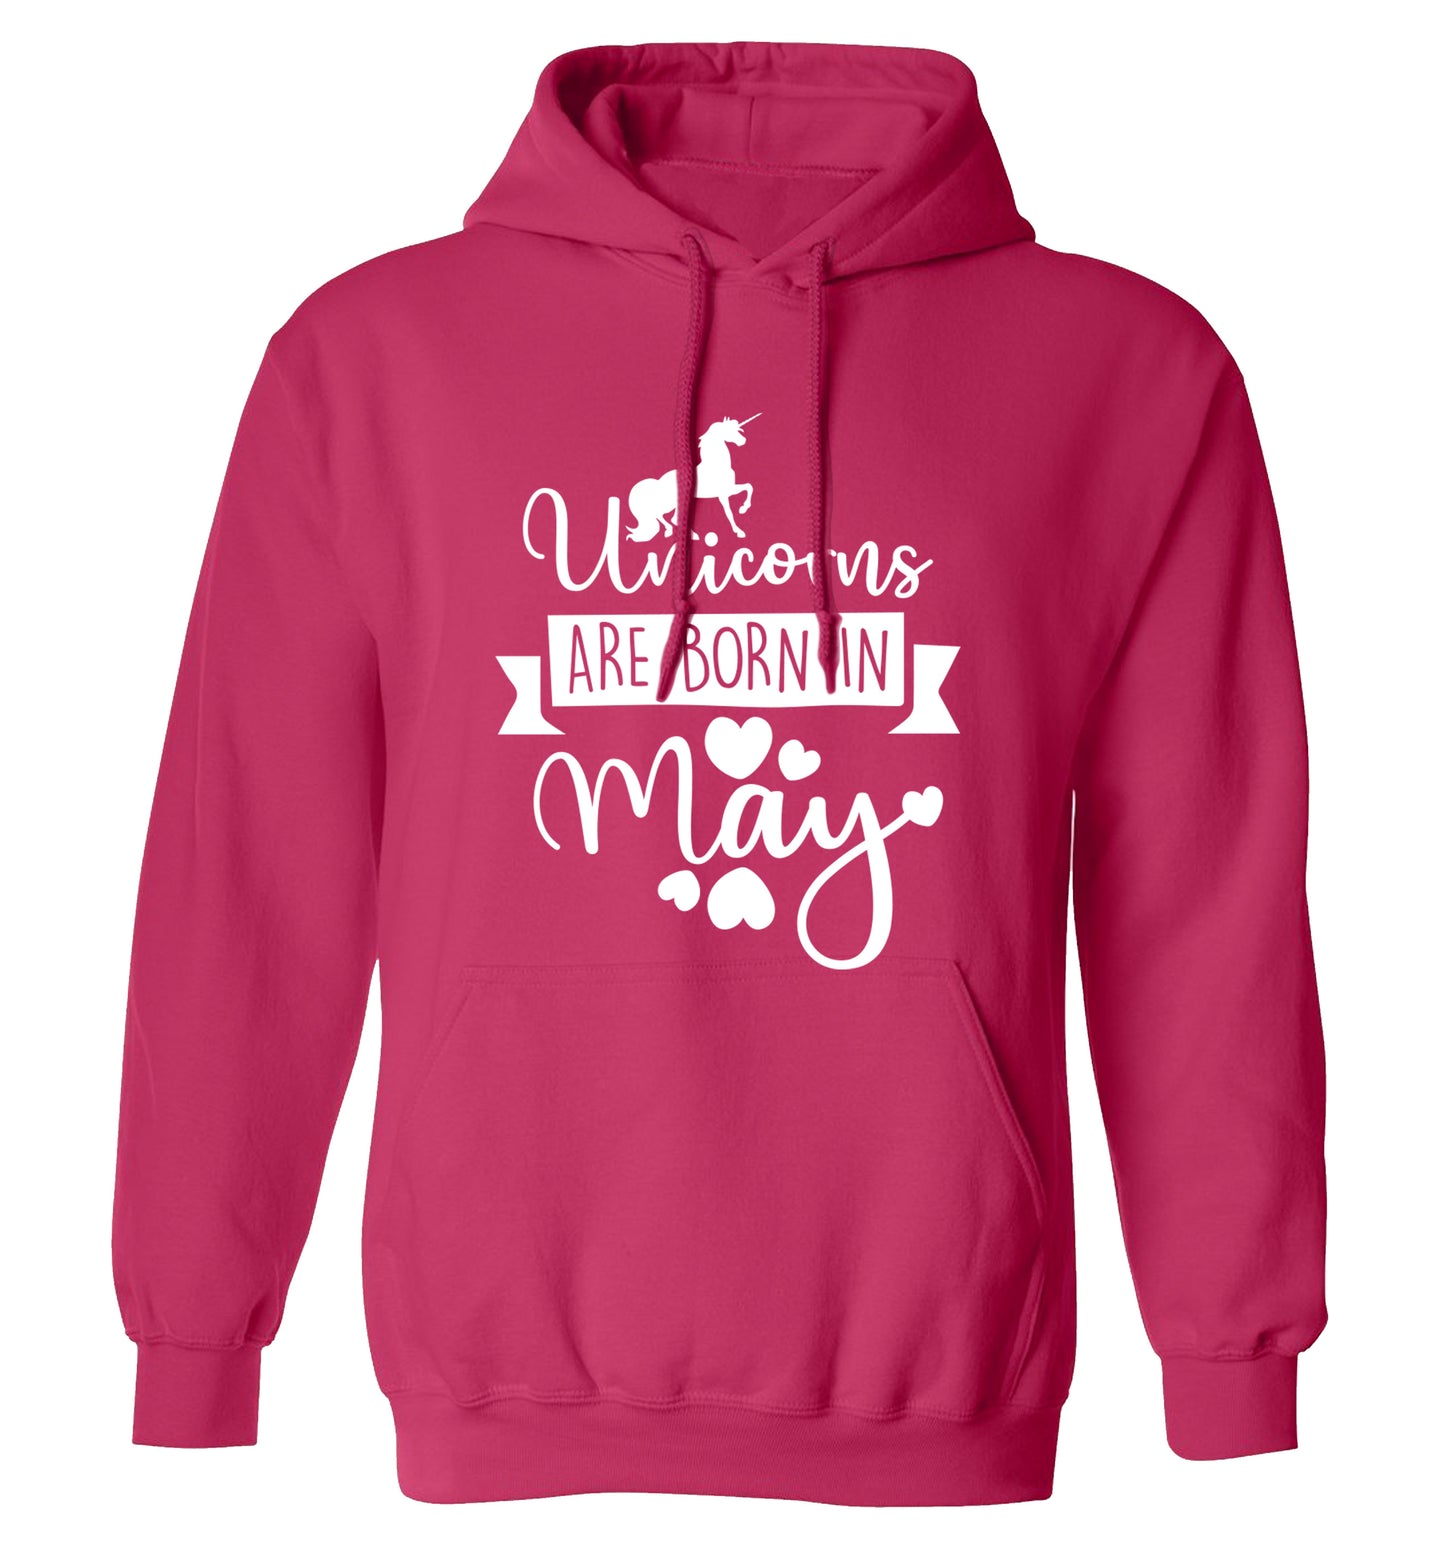 Unicorns are born in May adults unisex pink hoodie 2XL